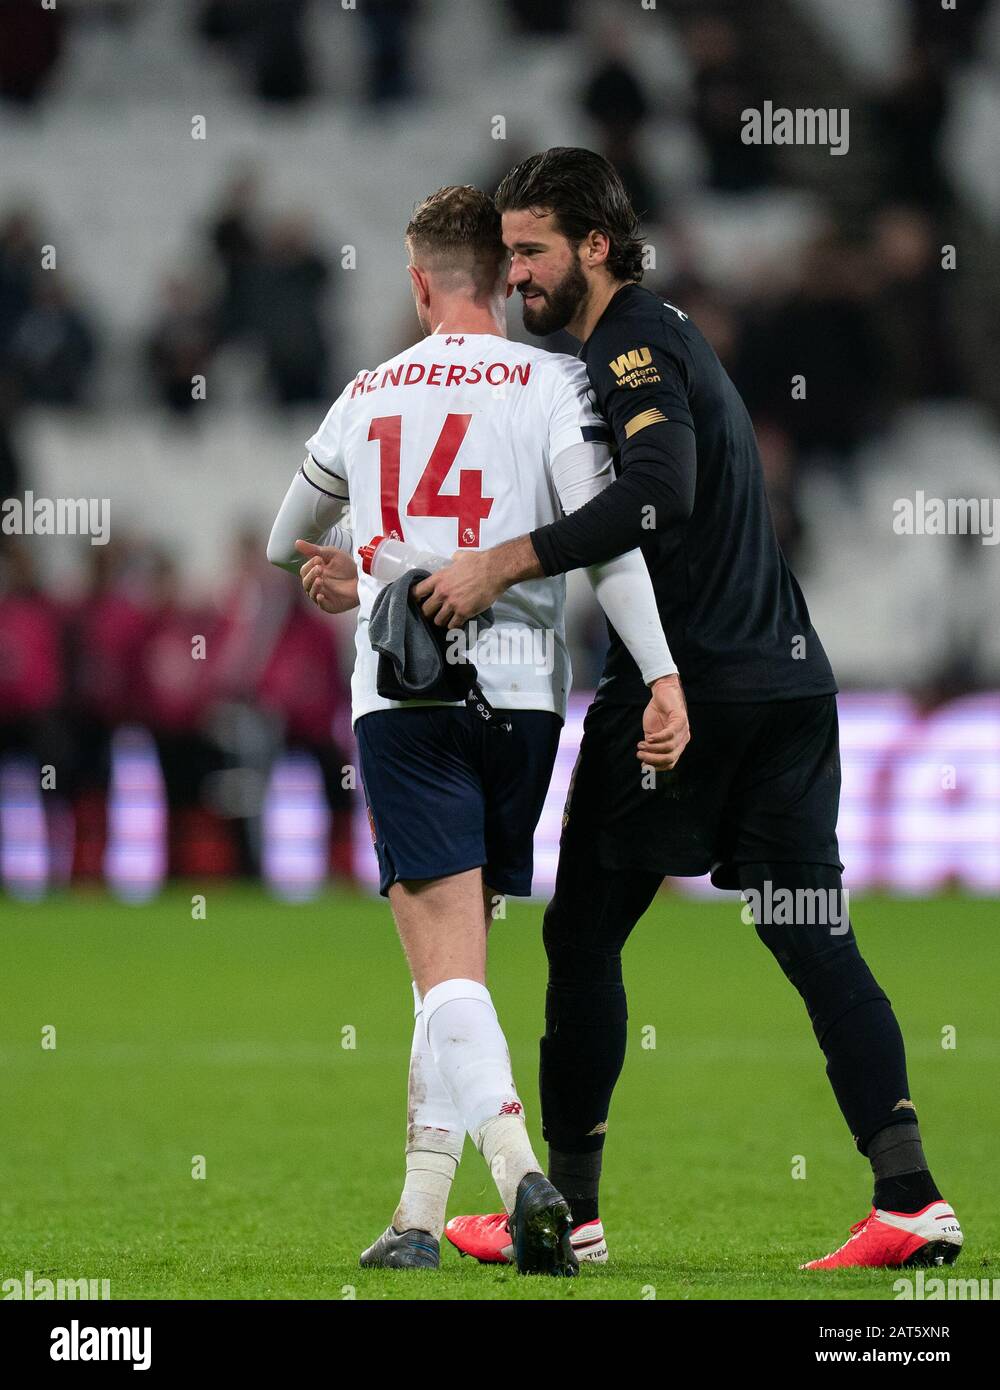 Goalkeeper Alisson Becker & Jordan Henderson of Liverpool at full time during the Premier League match between West Ham United and Liverpool at the Ol Stock Photo